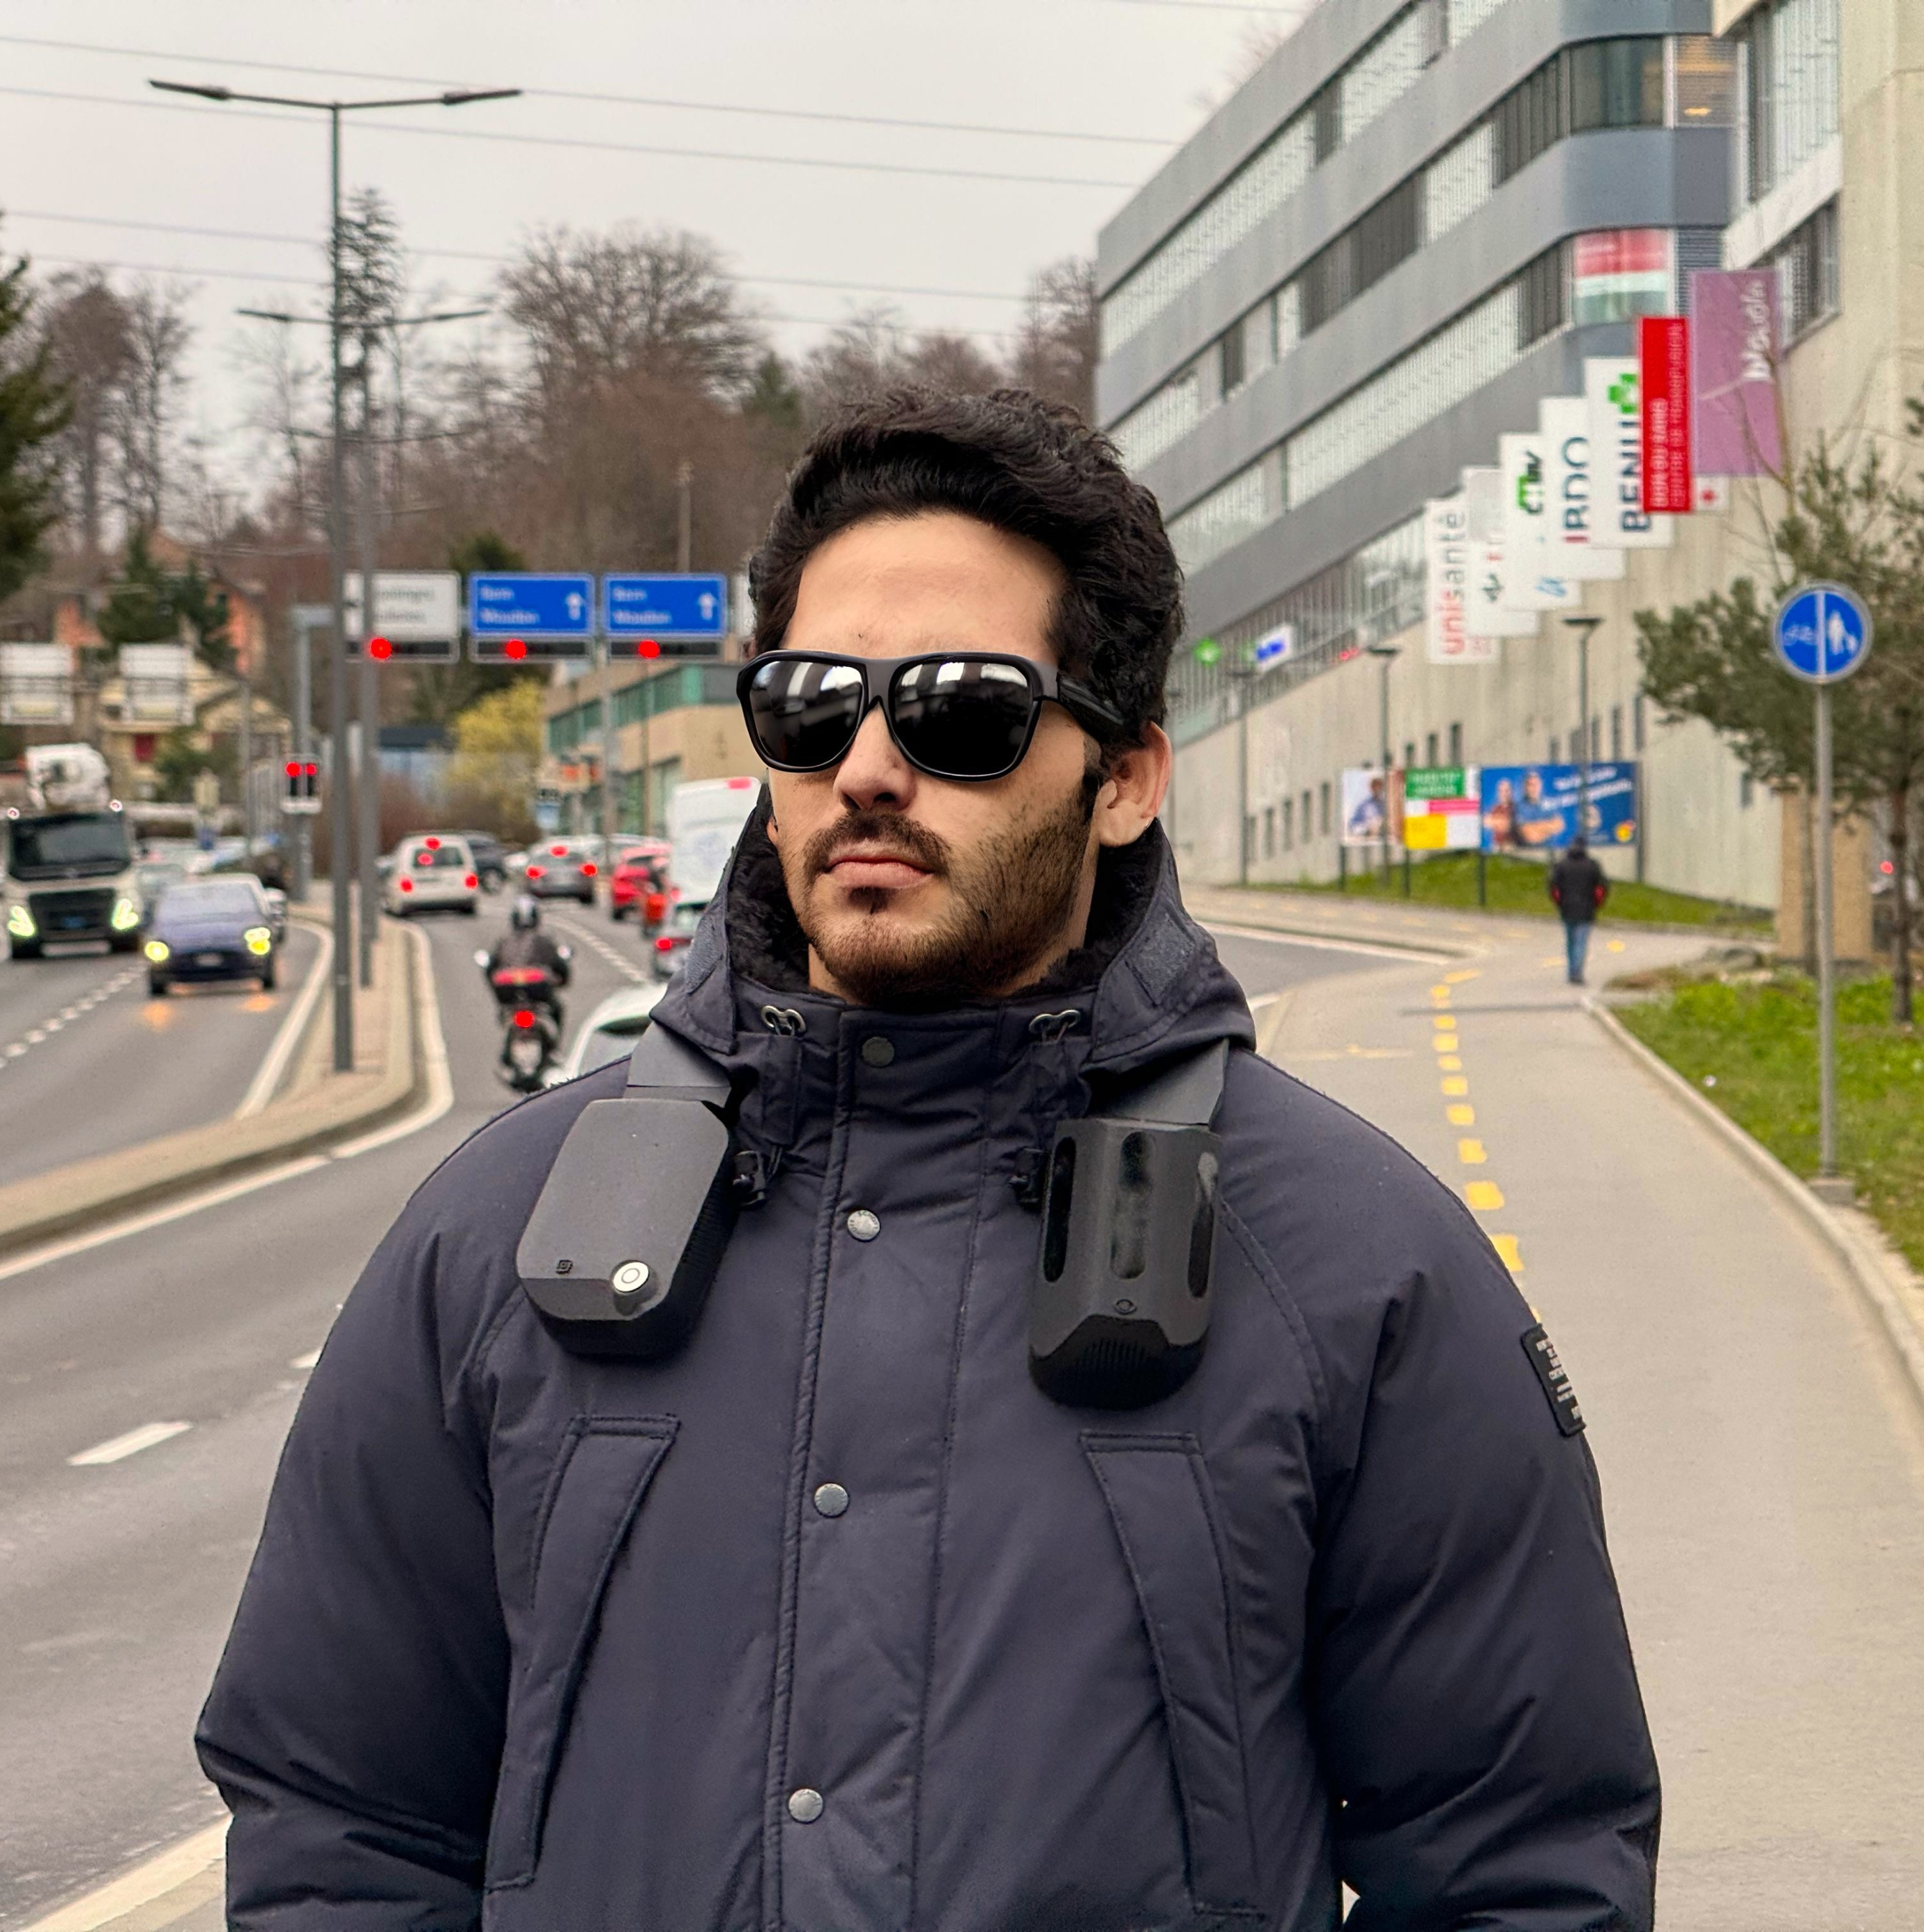 A man wearing a modern dark down jacket with a gadget attached to his shoulders, wearing dark sunglasses, and standing on a city sidewalk with a road and city traffic in the background. He uses this device in his daily life. The text next to his review reads: 'I honestly don't think I've ever bought something with so much potential to change lives. - Stuart Beveridge from Seescape.